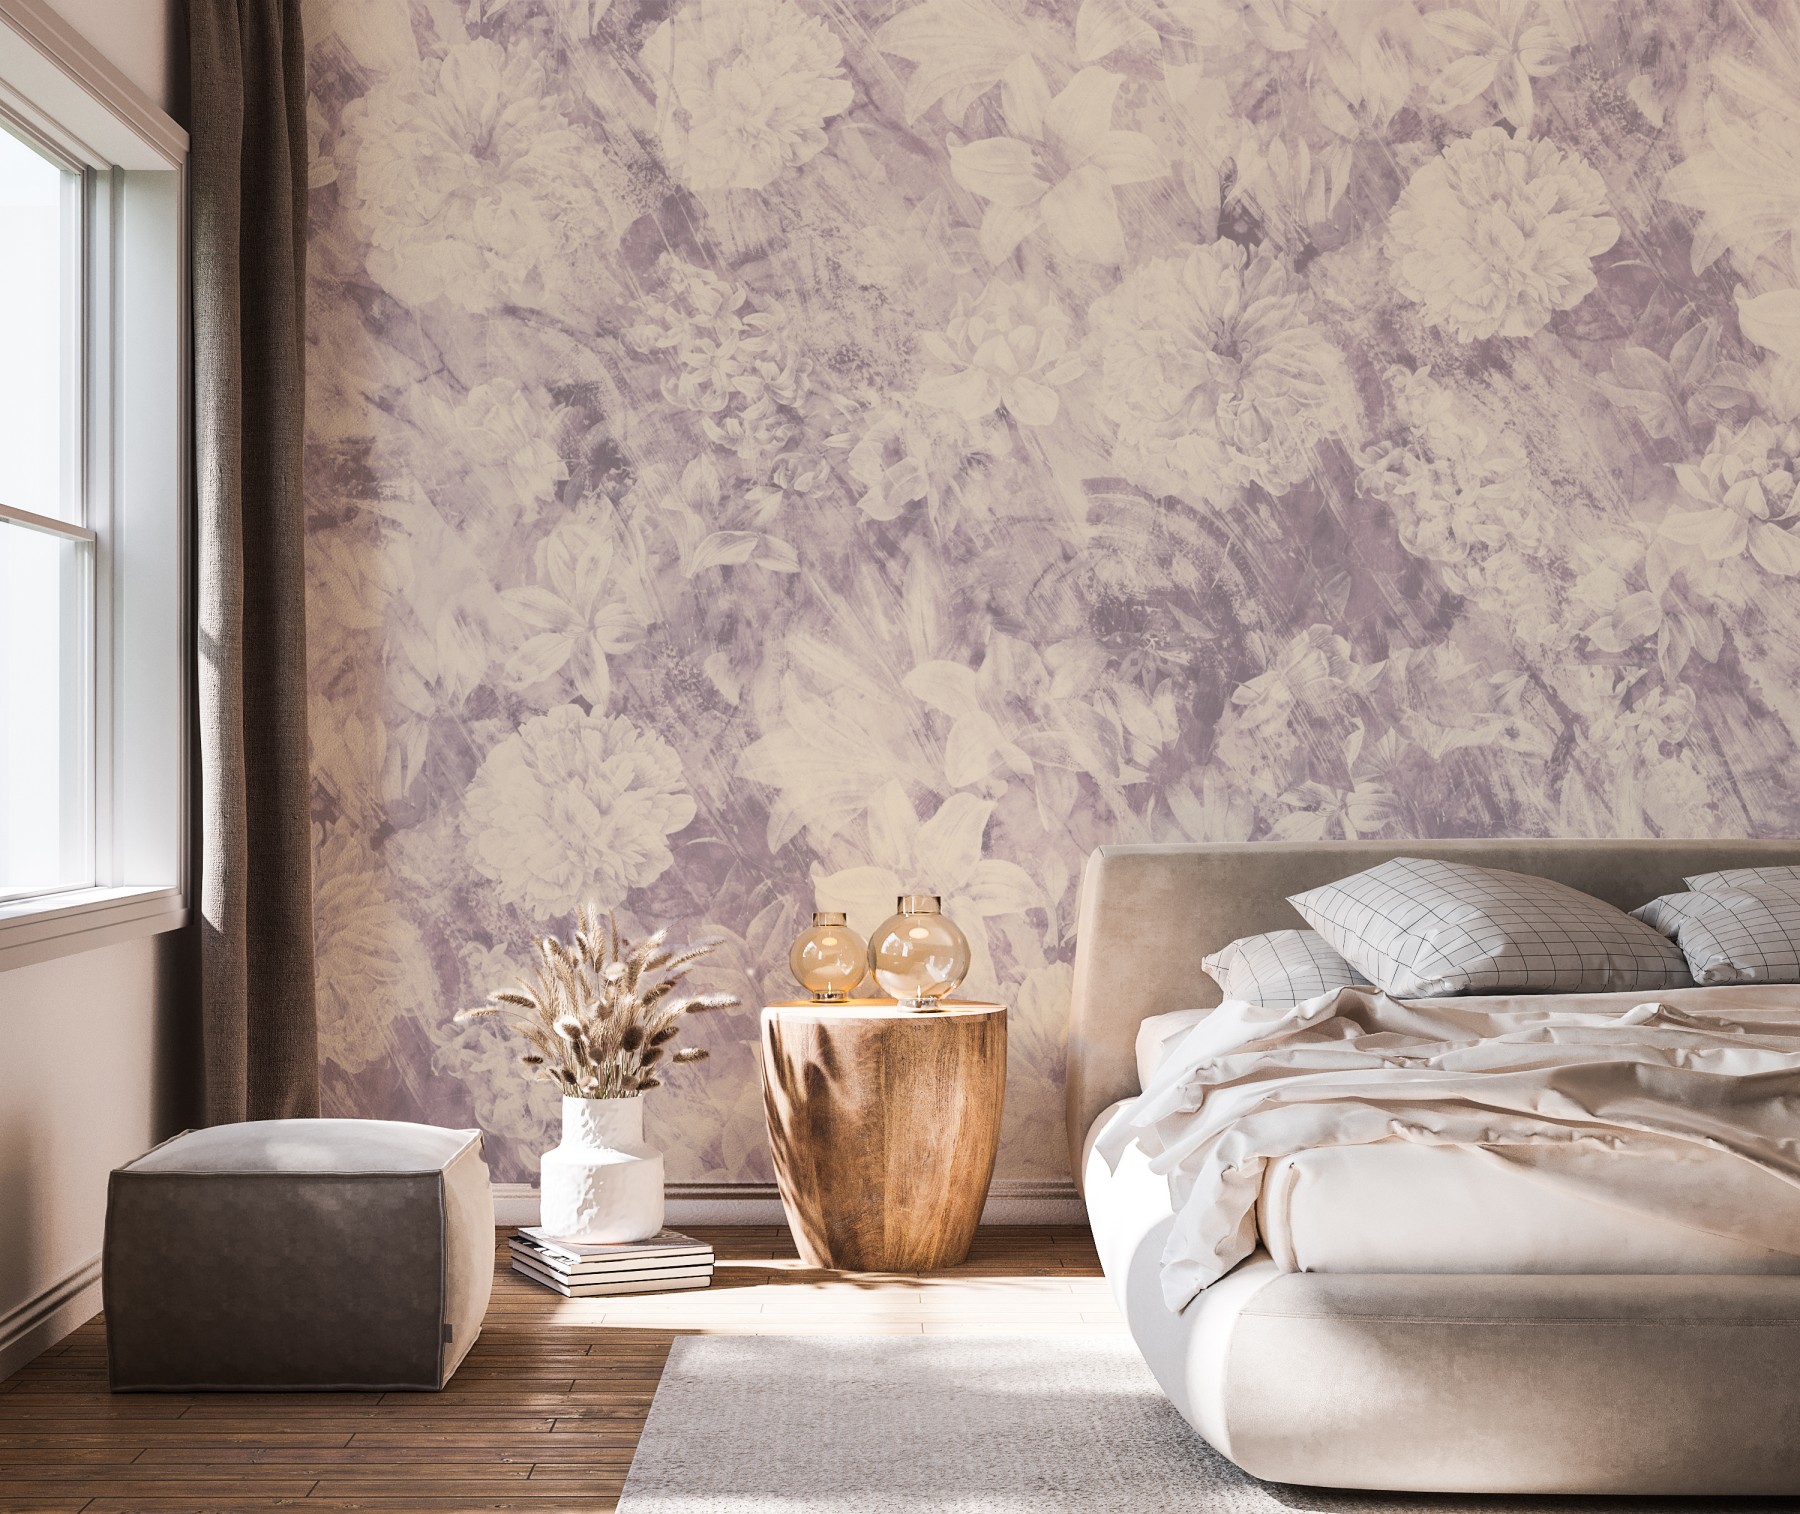 Distressed Floral - Dusty Lilac | WALLPAPER